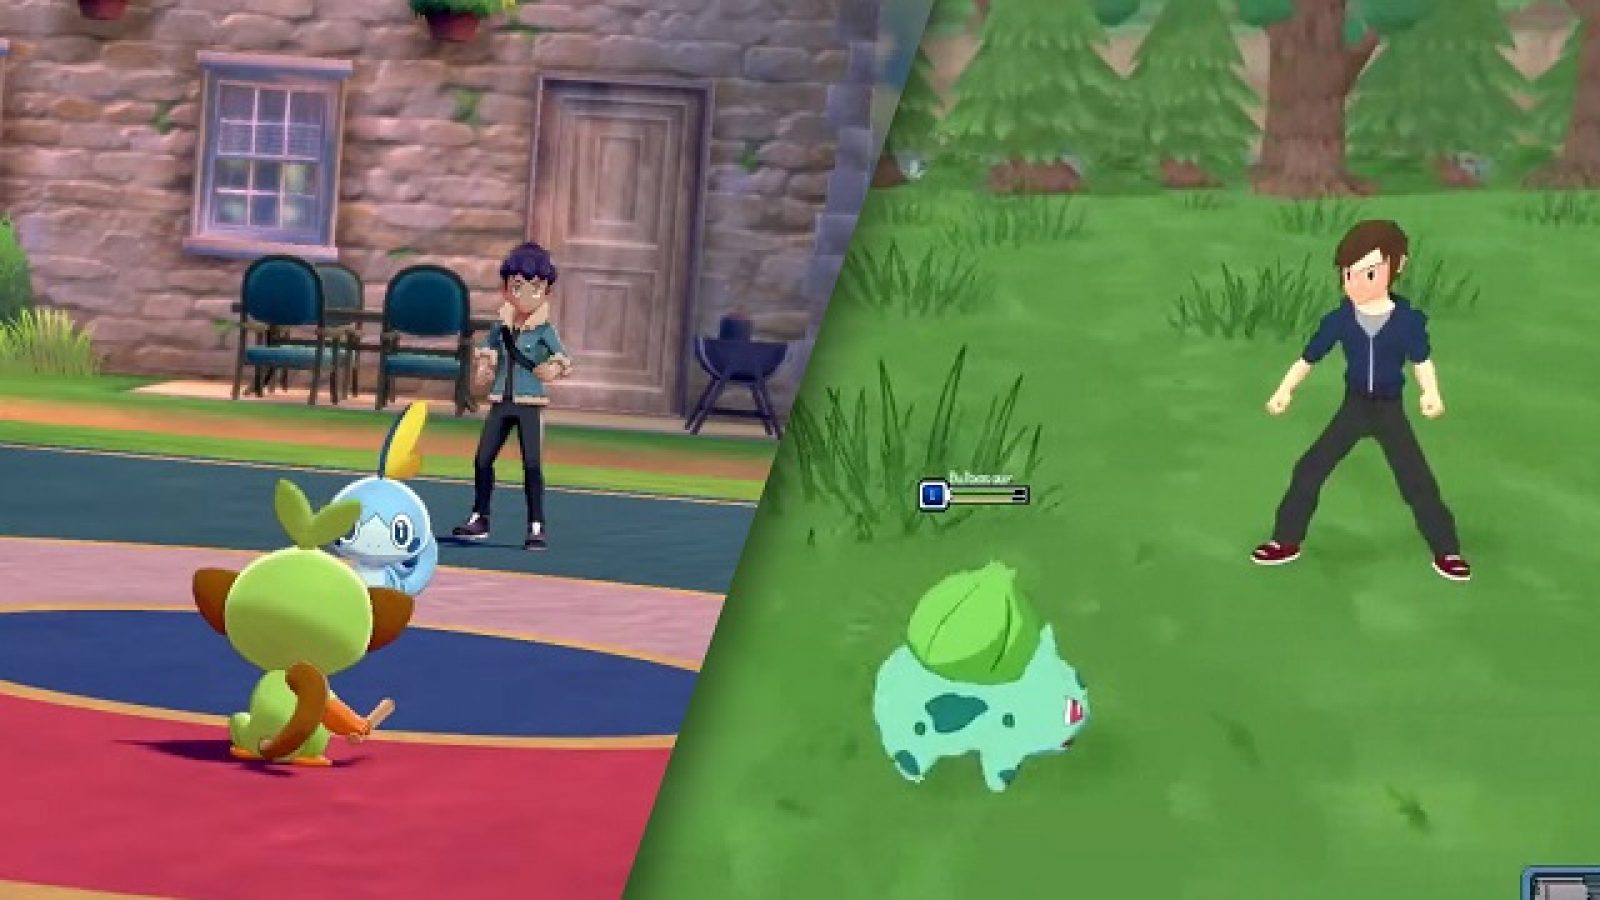 Pokemon Sword and Shield will have open-world gameplay and giant